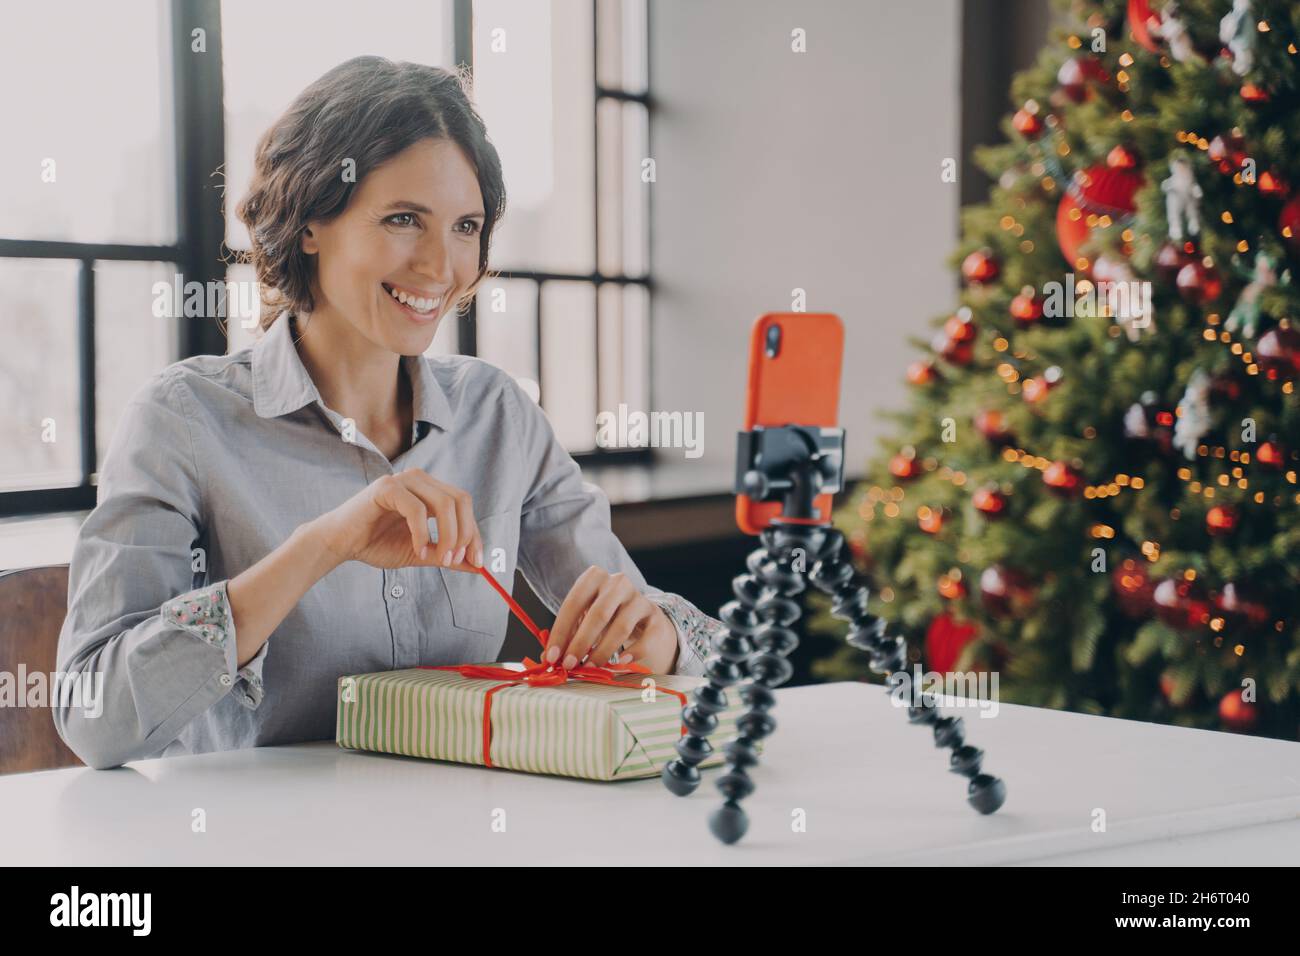 Joyful lady sitting at table with Xmas tree on background in front of phone on tripod Stock Photo